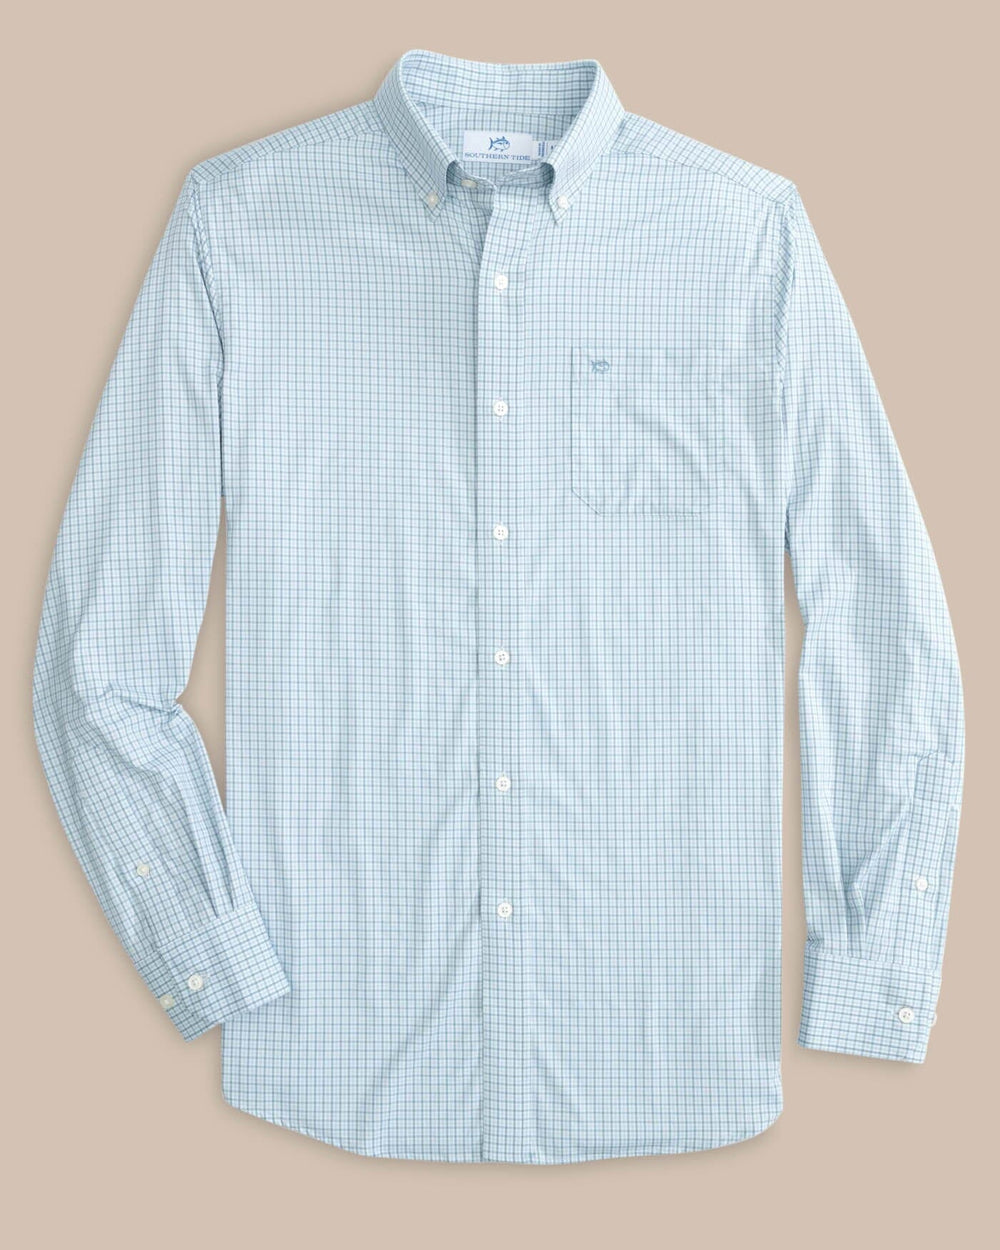 The front view of the Southern Tide brrr Intercoastal McBee Check Long Sleeve Sportshirt by Southern Tide - Windward Blue